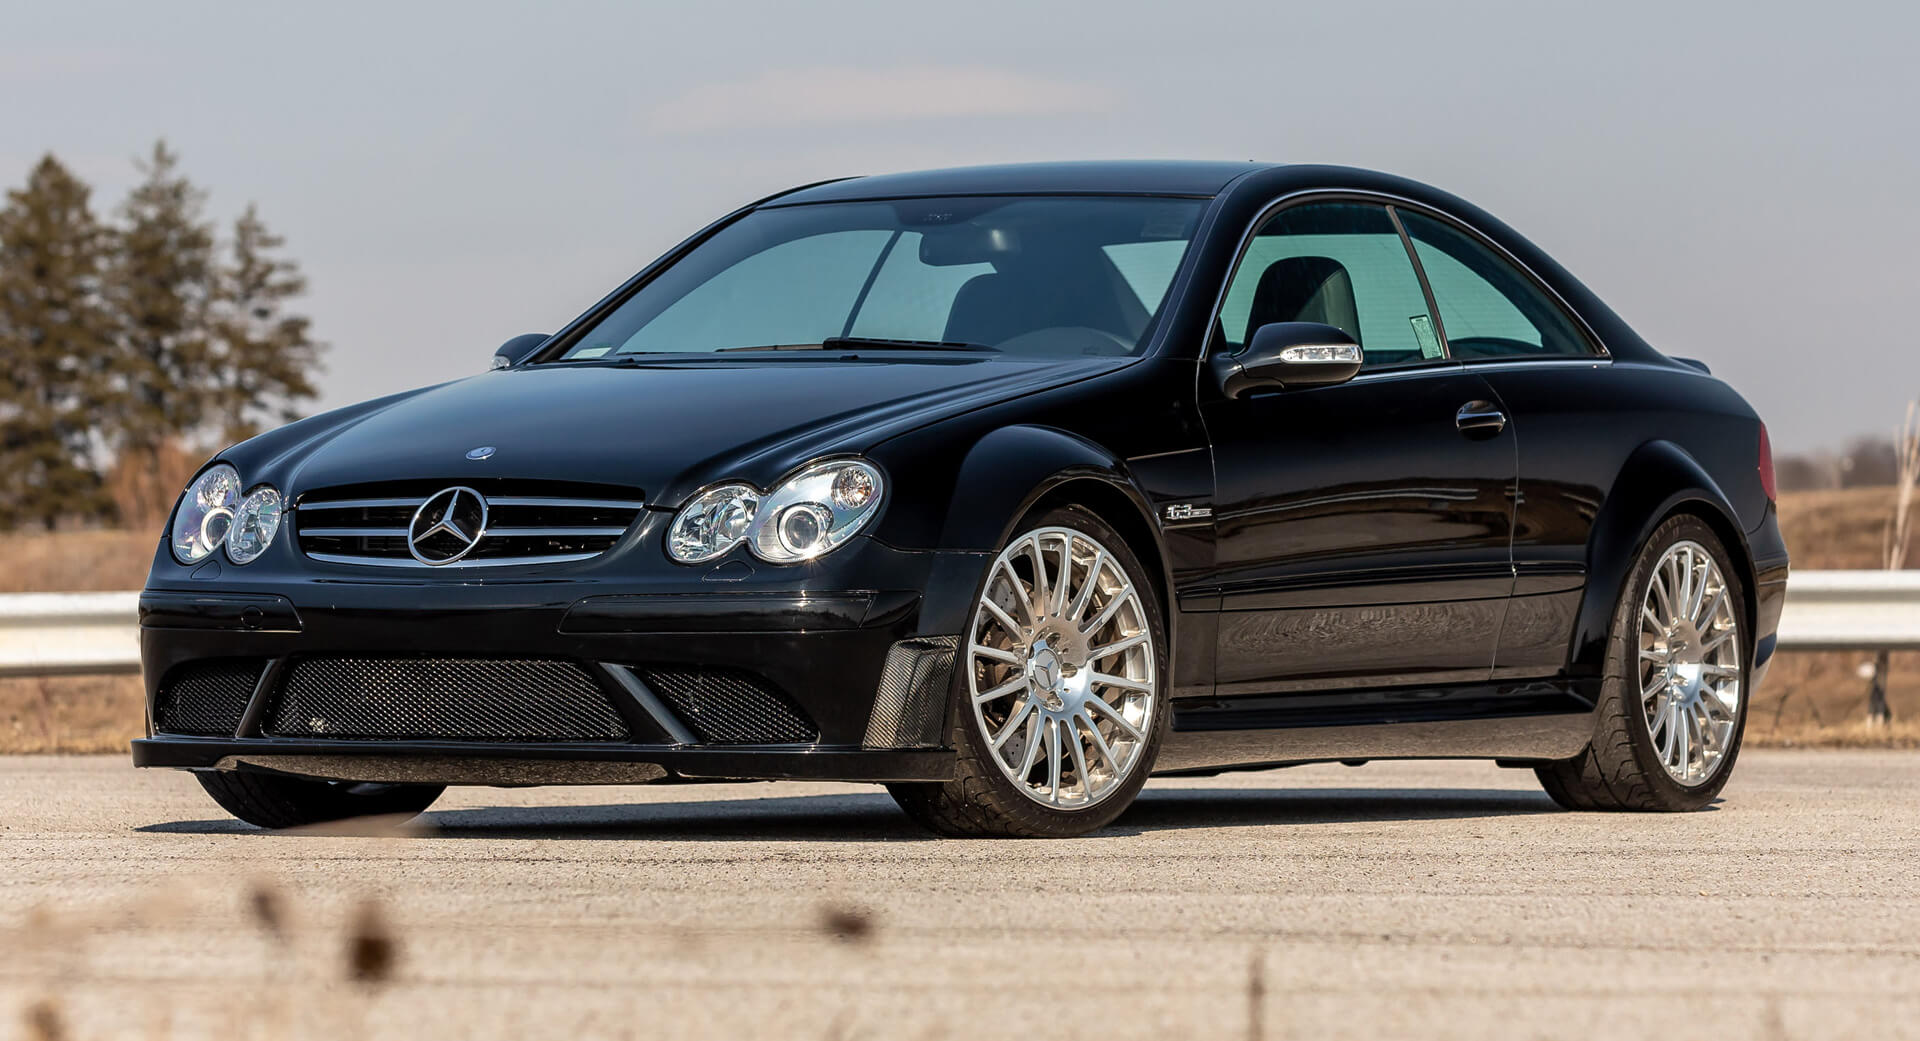 Mercedes Benz CLK AMG All You Need To Know About Mercedes Benz CLK AMG